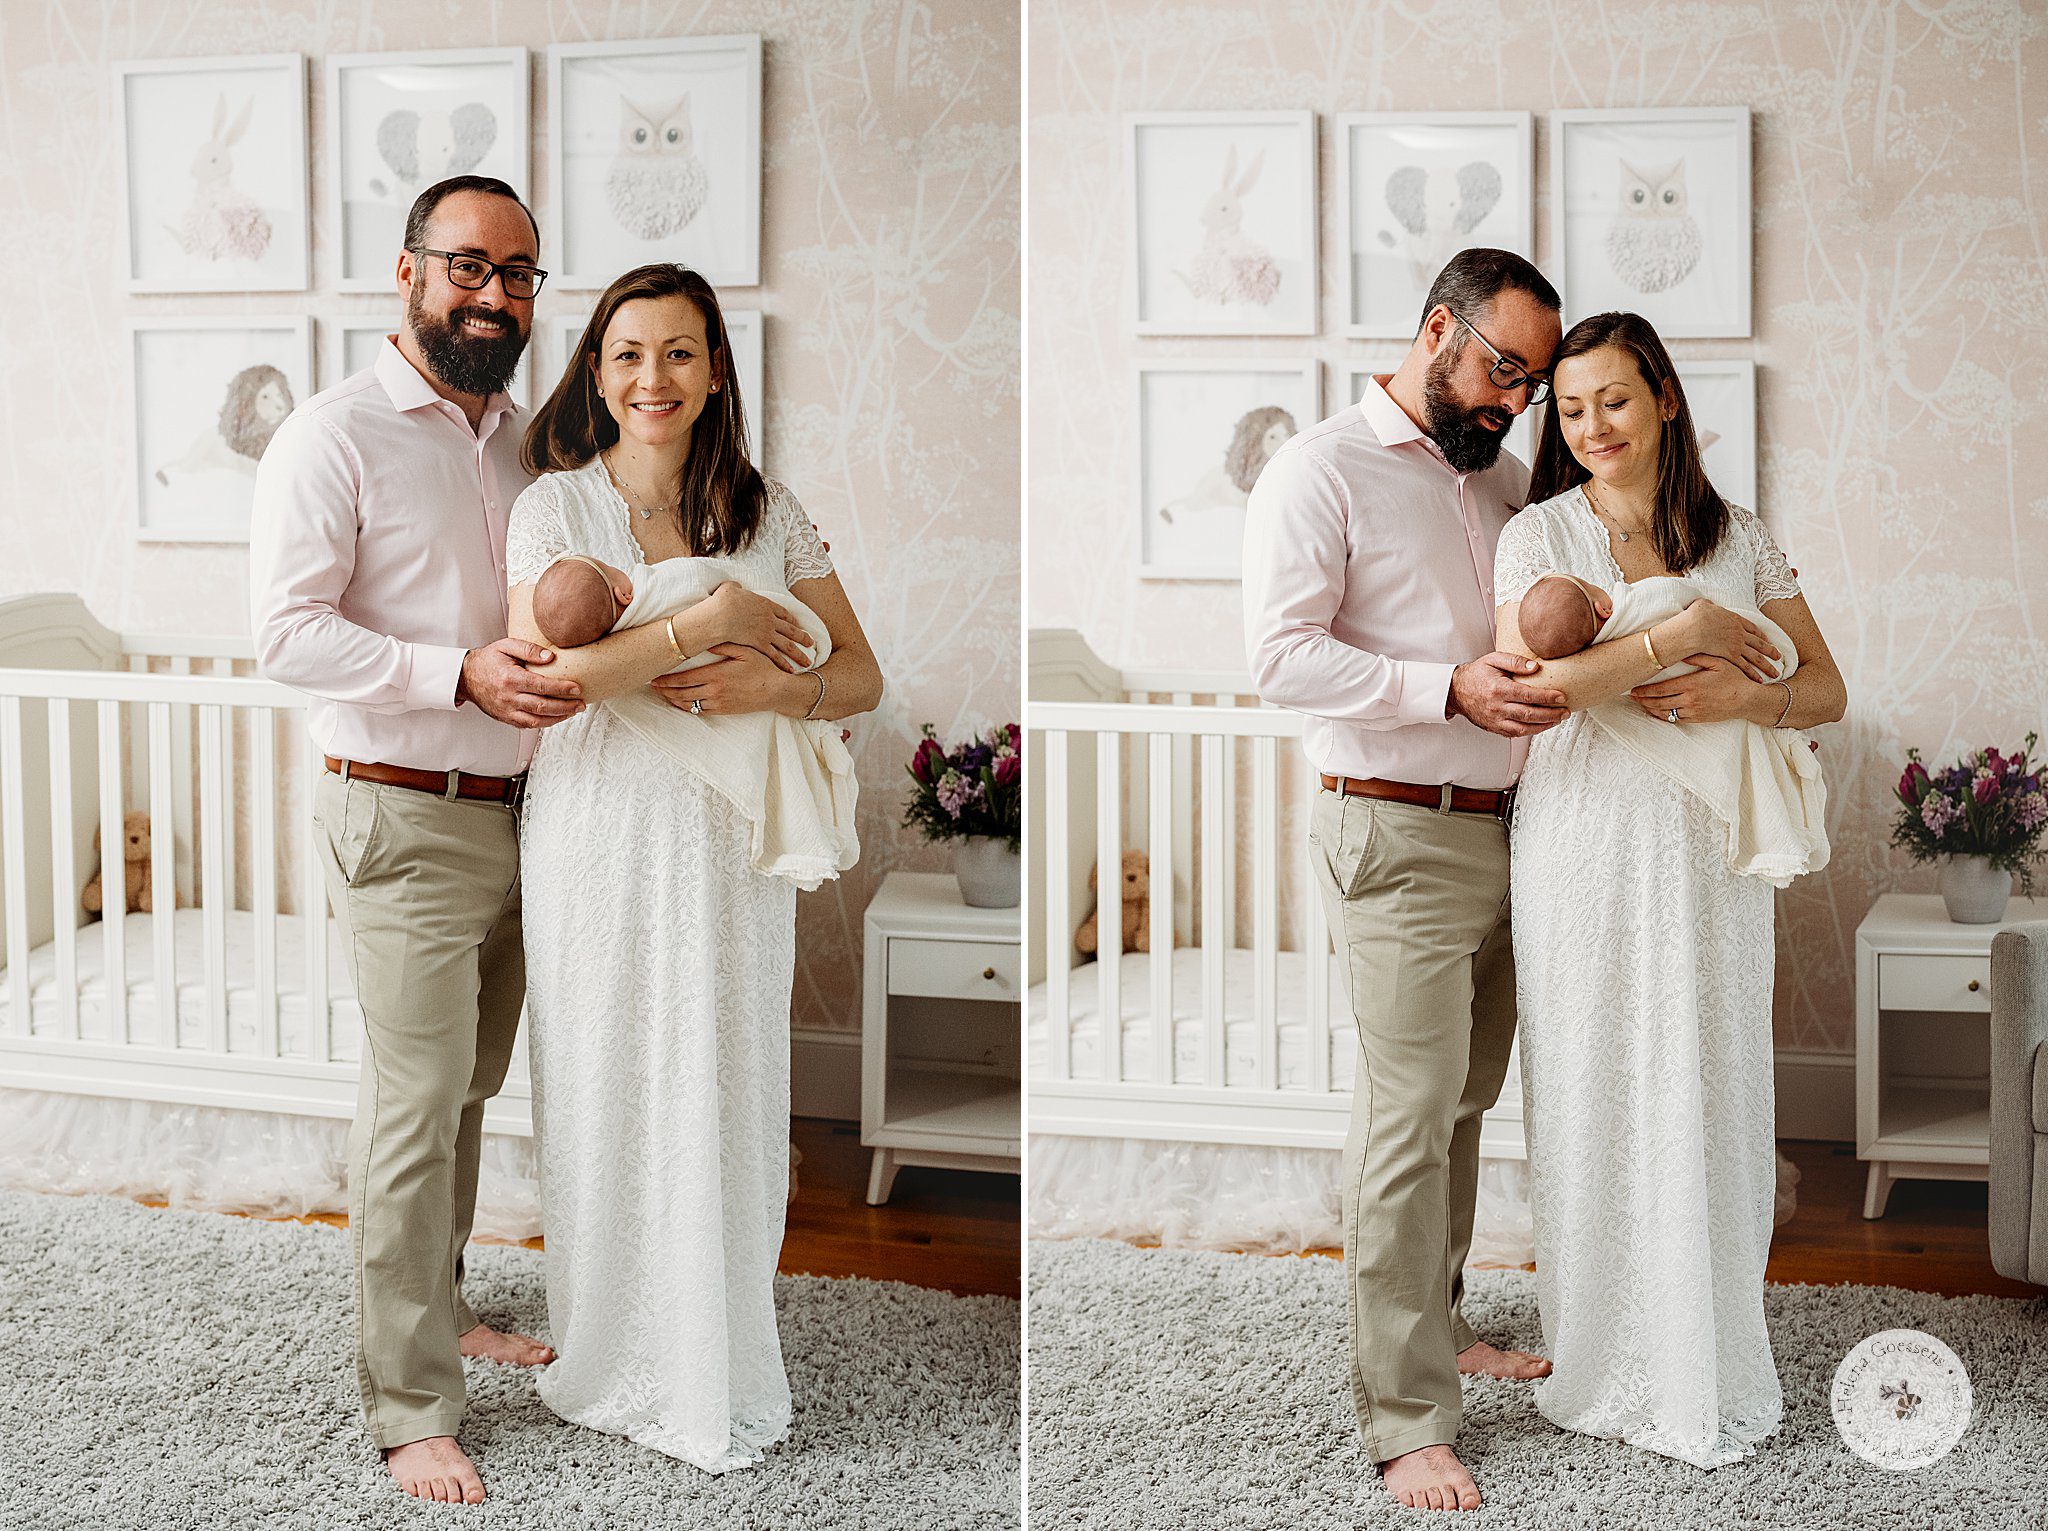 mom and dad pose in nursery by crib holding baby girl during Dover MA Lifestyle Newborn Session